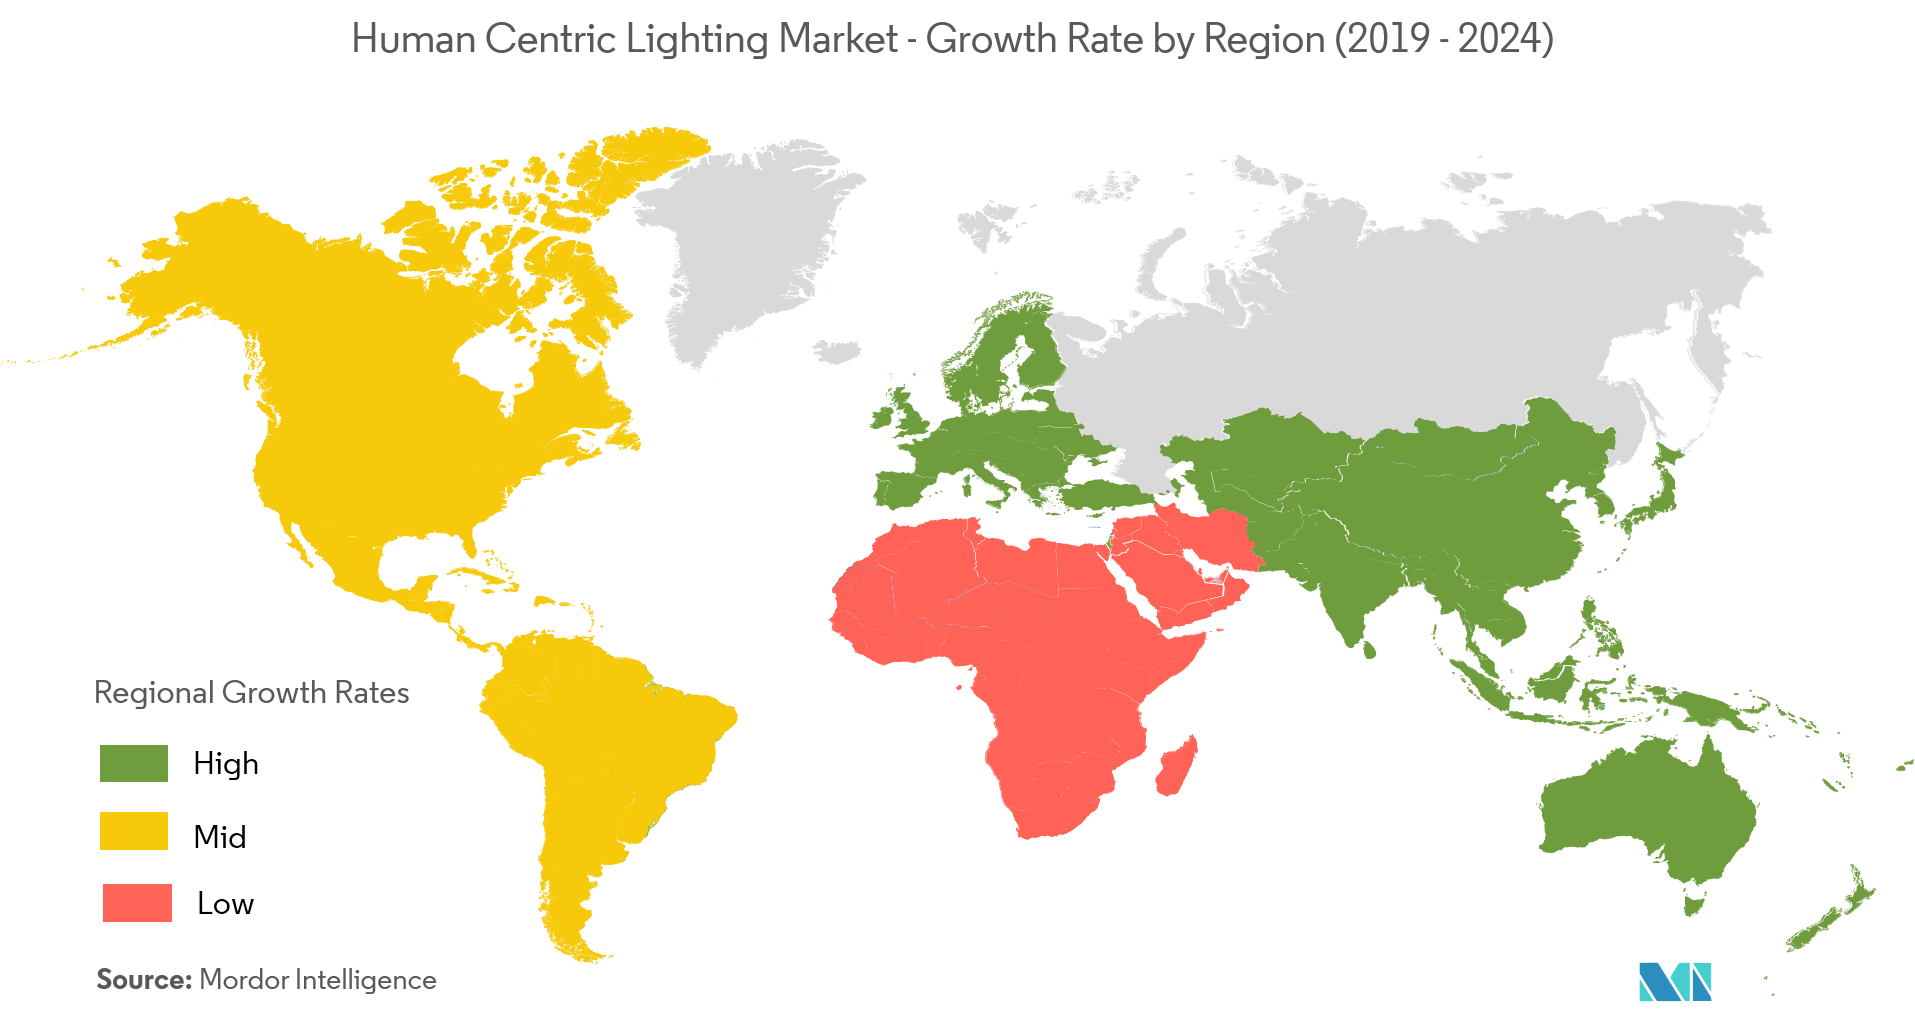 Human Centric Lighting Market - Growth Rate by Region  (2019-2024)